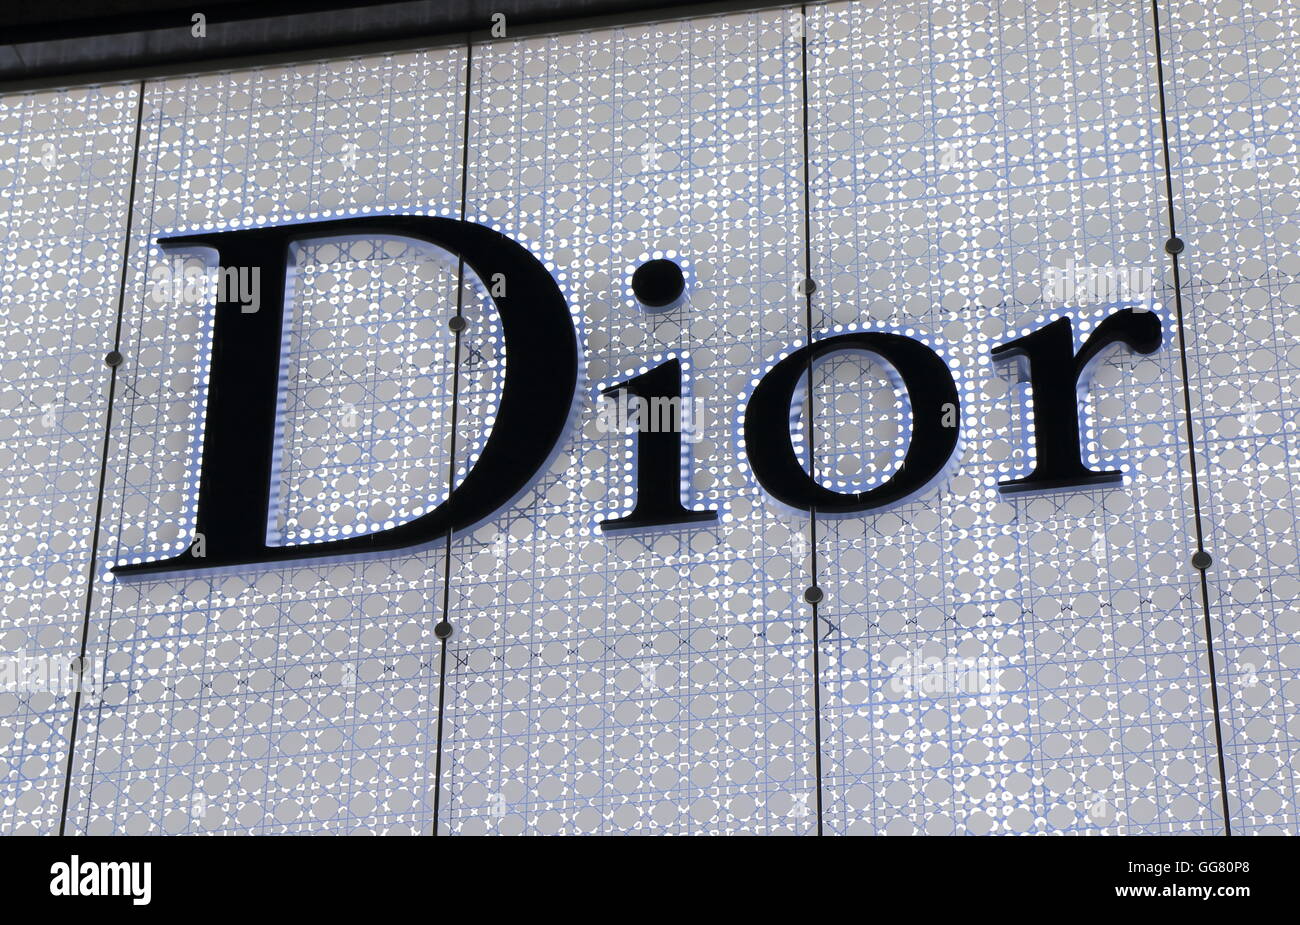 Dior company logo. Christian Dior is a French company which owns